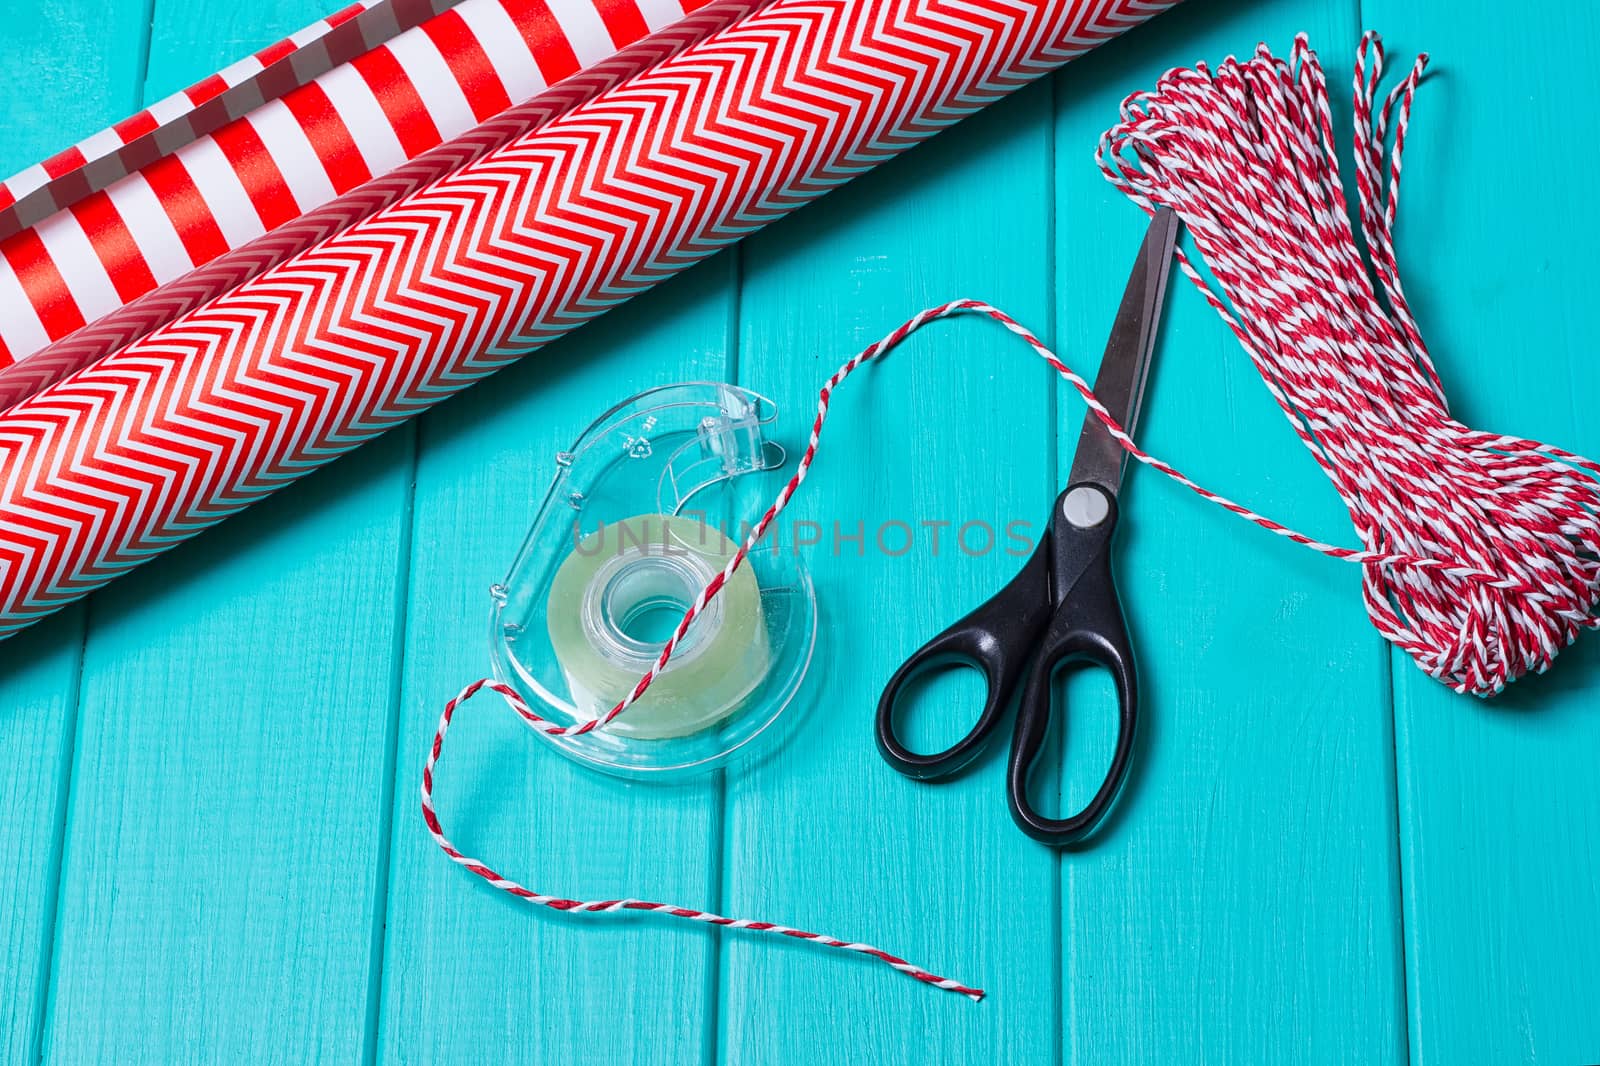 Christmas Gift Wrapping Party Time with Colorful Paper, Ribbon Bows, Scissors and Tape on Cyan Blue Shabby Chic Wood Board Background Space for copy, text